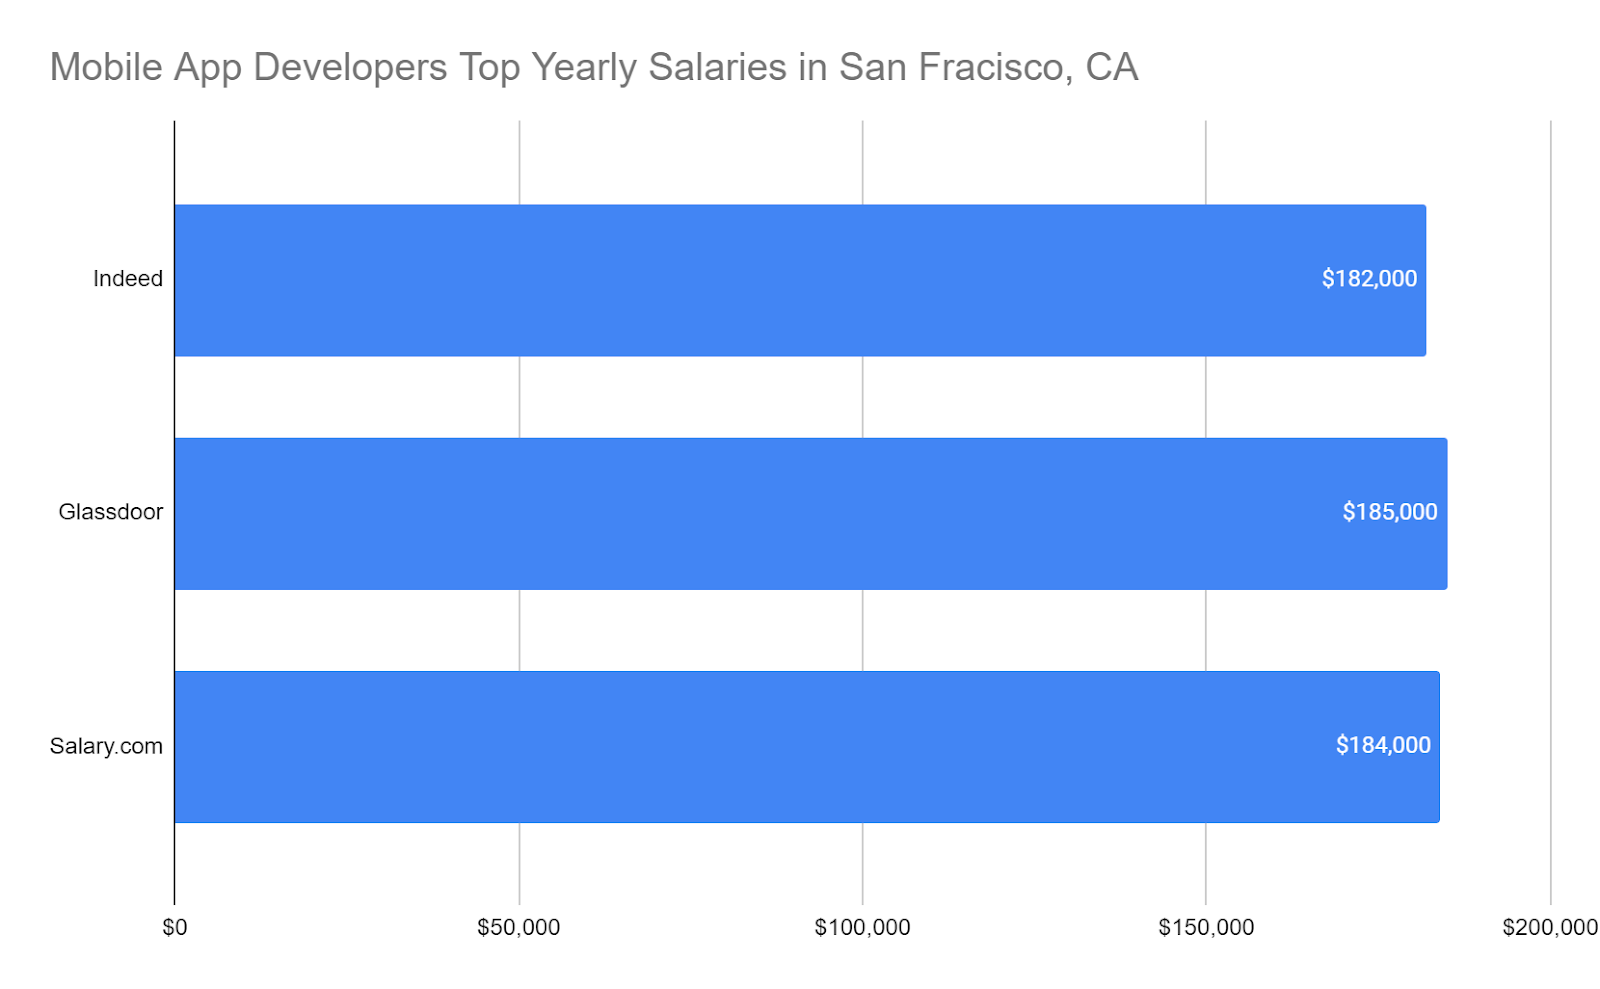 Mobile App Developers Top Yearly Salary According to Indeed, Glassdoor and Salary.com September 2022